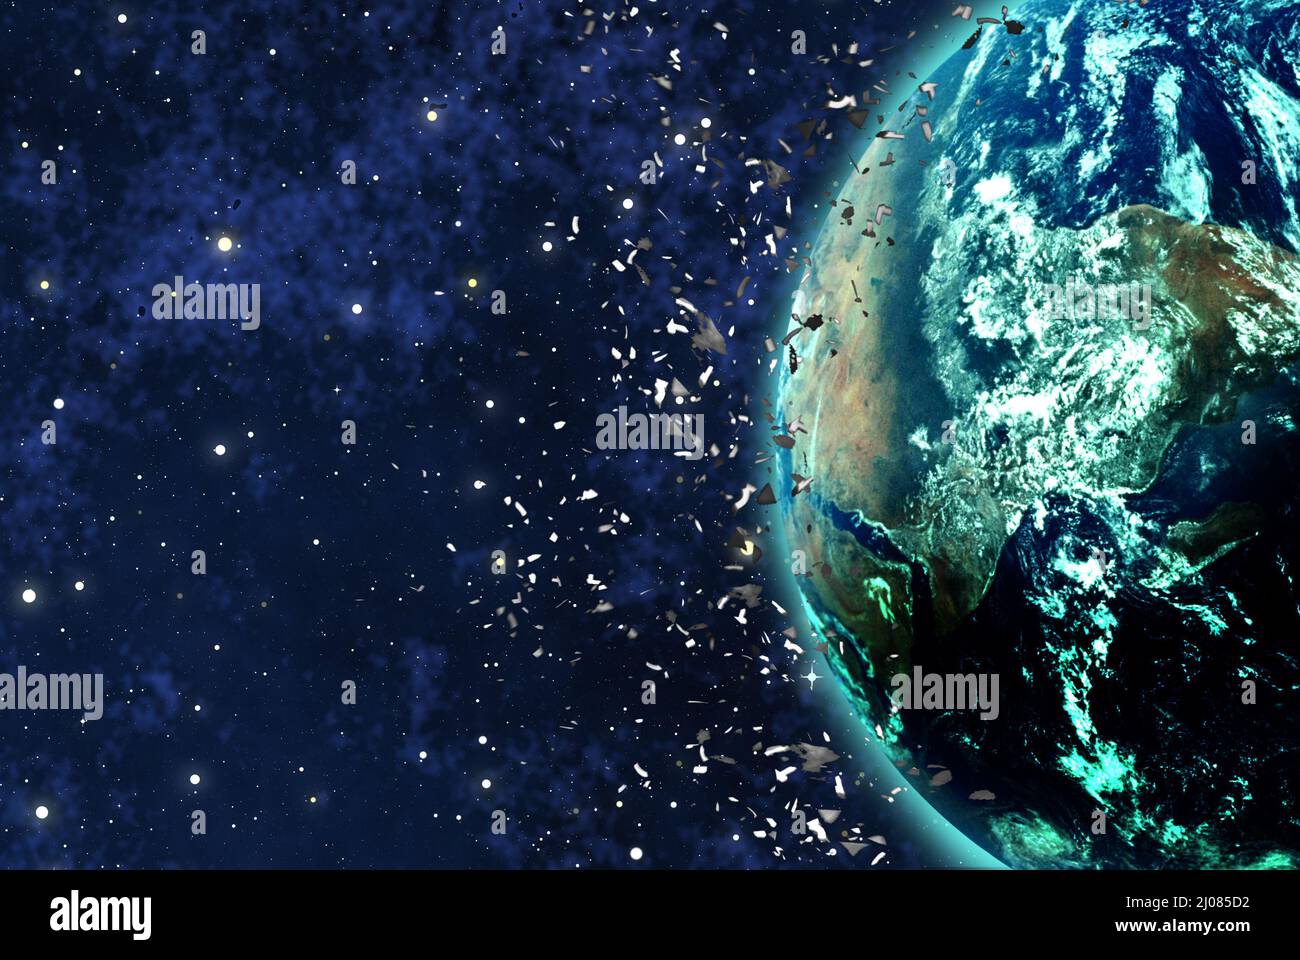 Earth surrounded by space junk Stock Photo